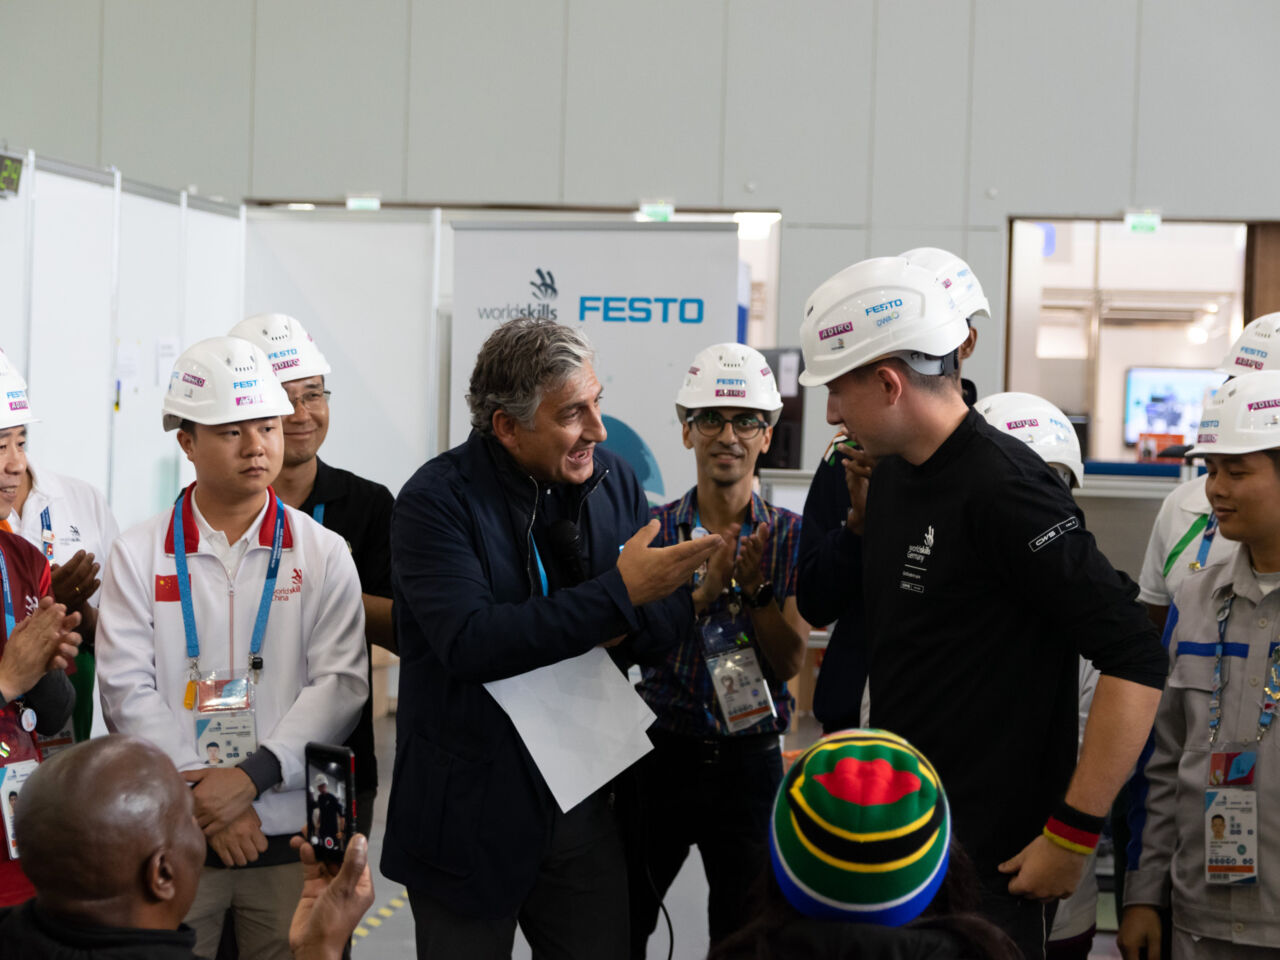 Lukas Kohl receiving the Sustainability Award for Water Technology, presented by WorldSkills and Festo.
